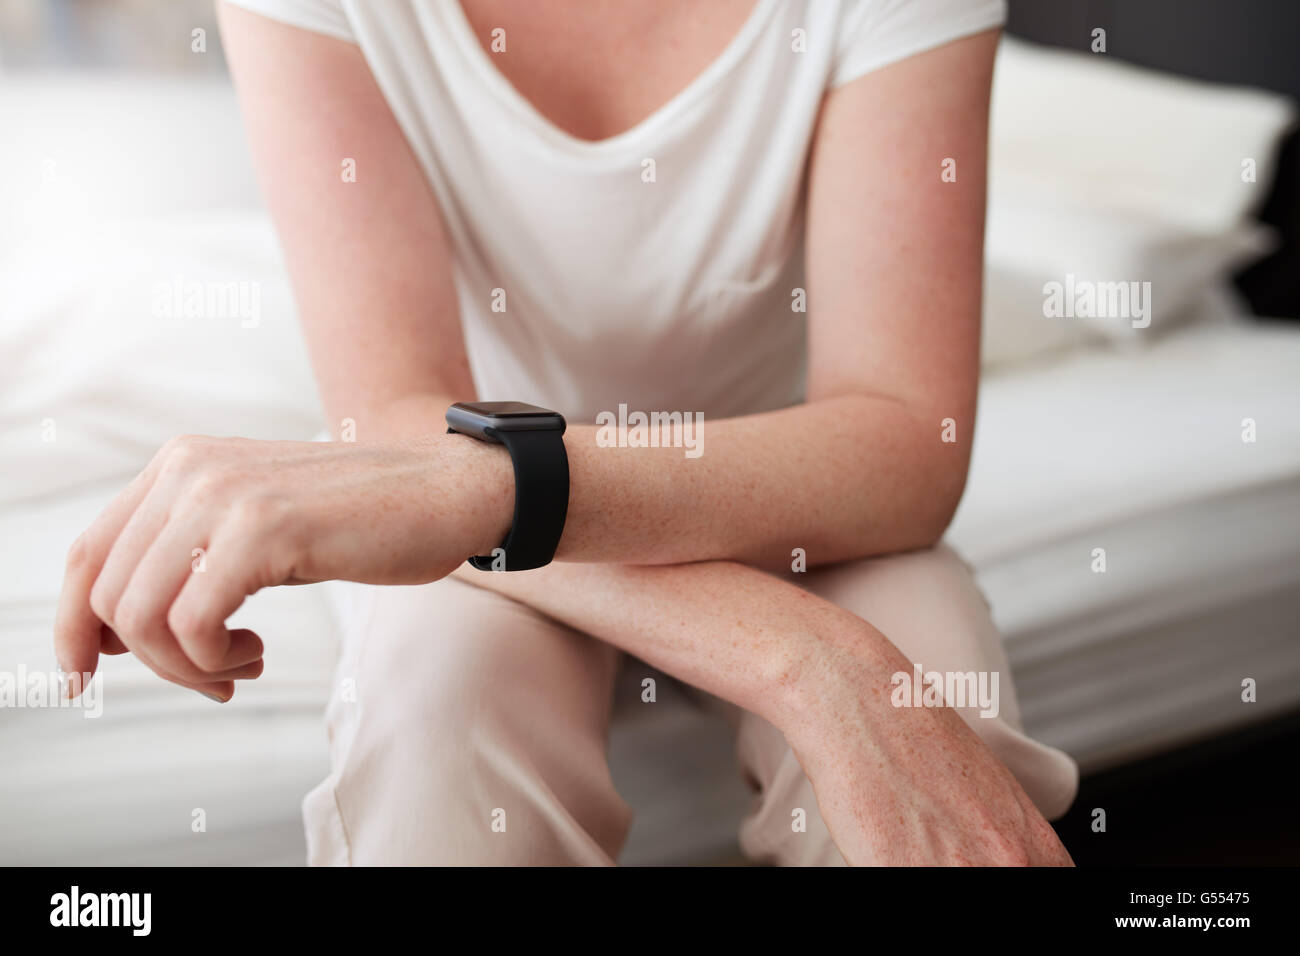 Cropped shot of a woman sitting on bed wearing a wrist watch, she is in bedroom at home. Focus on female hands and wrist watch. Stock Photo